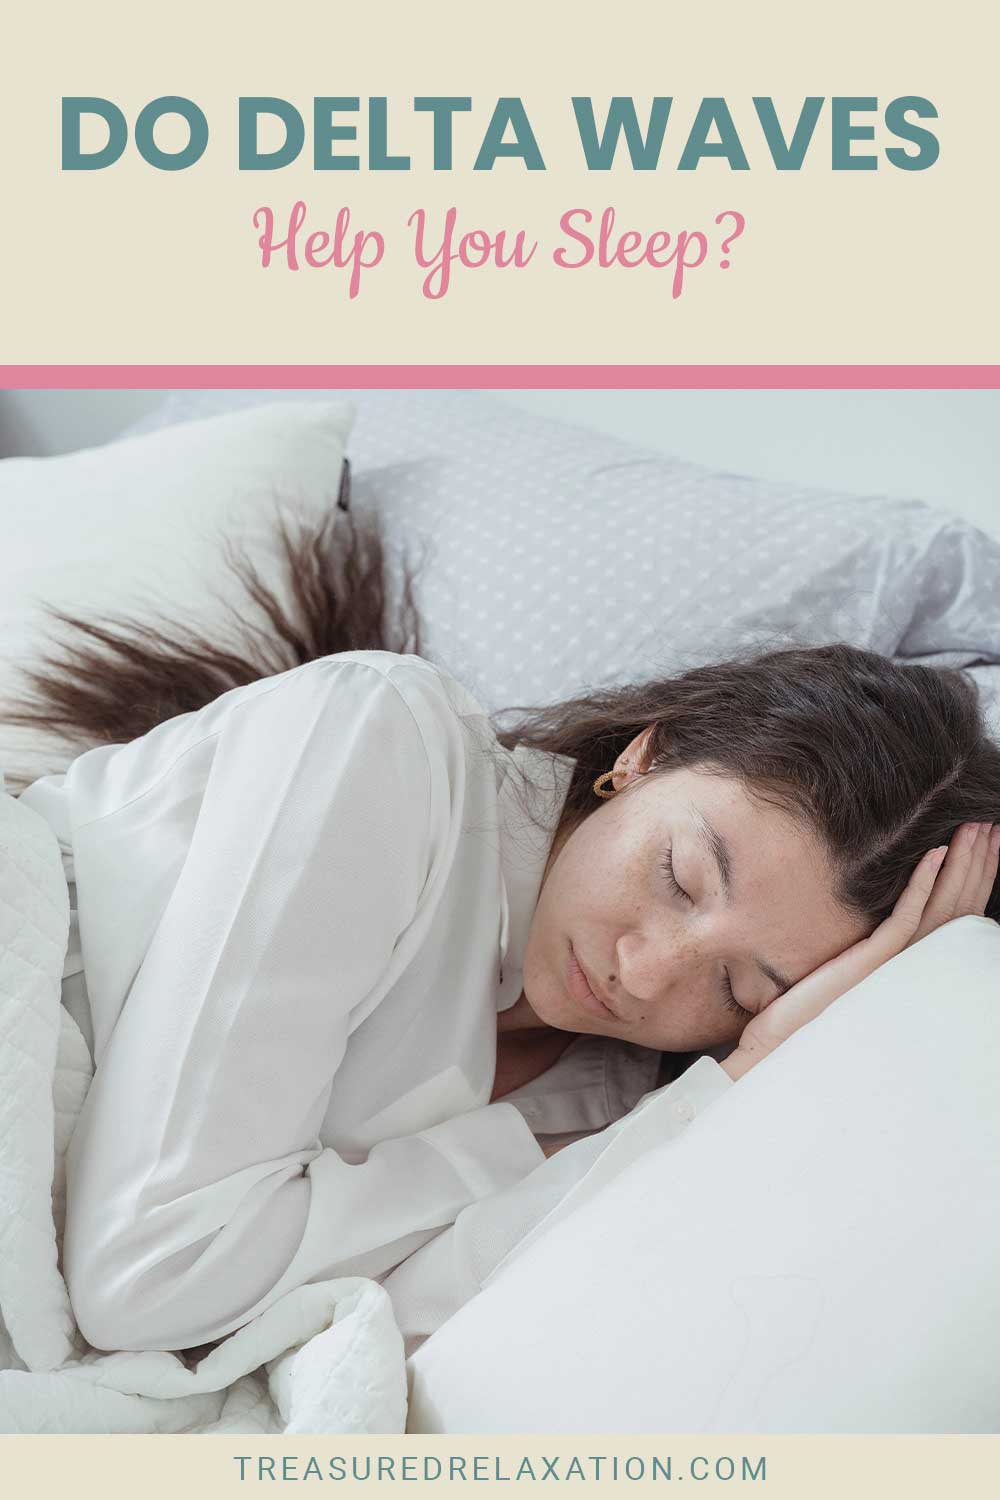 Woman in white dress sleeping on a white pillow - Do Delta Waves Help You Sleep?